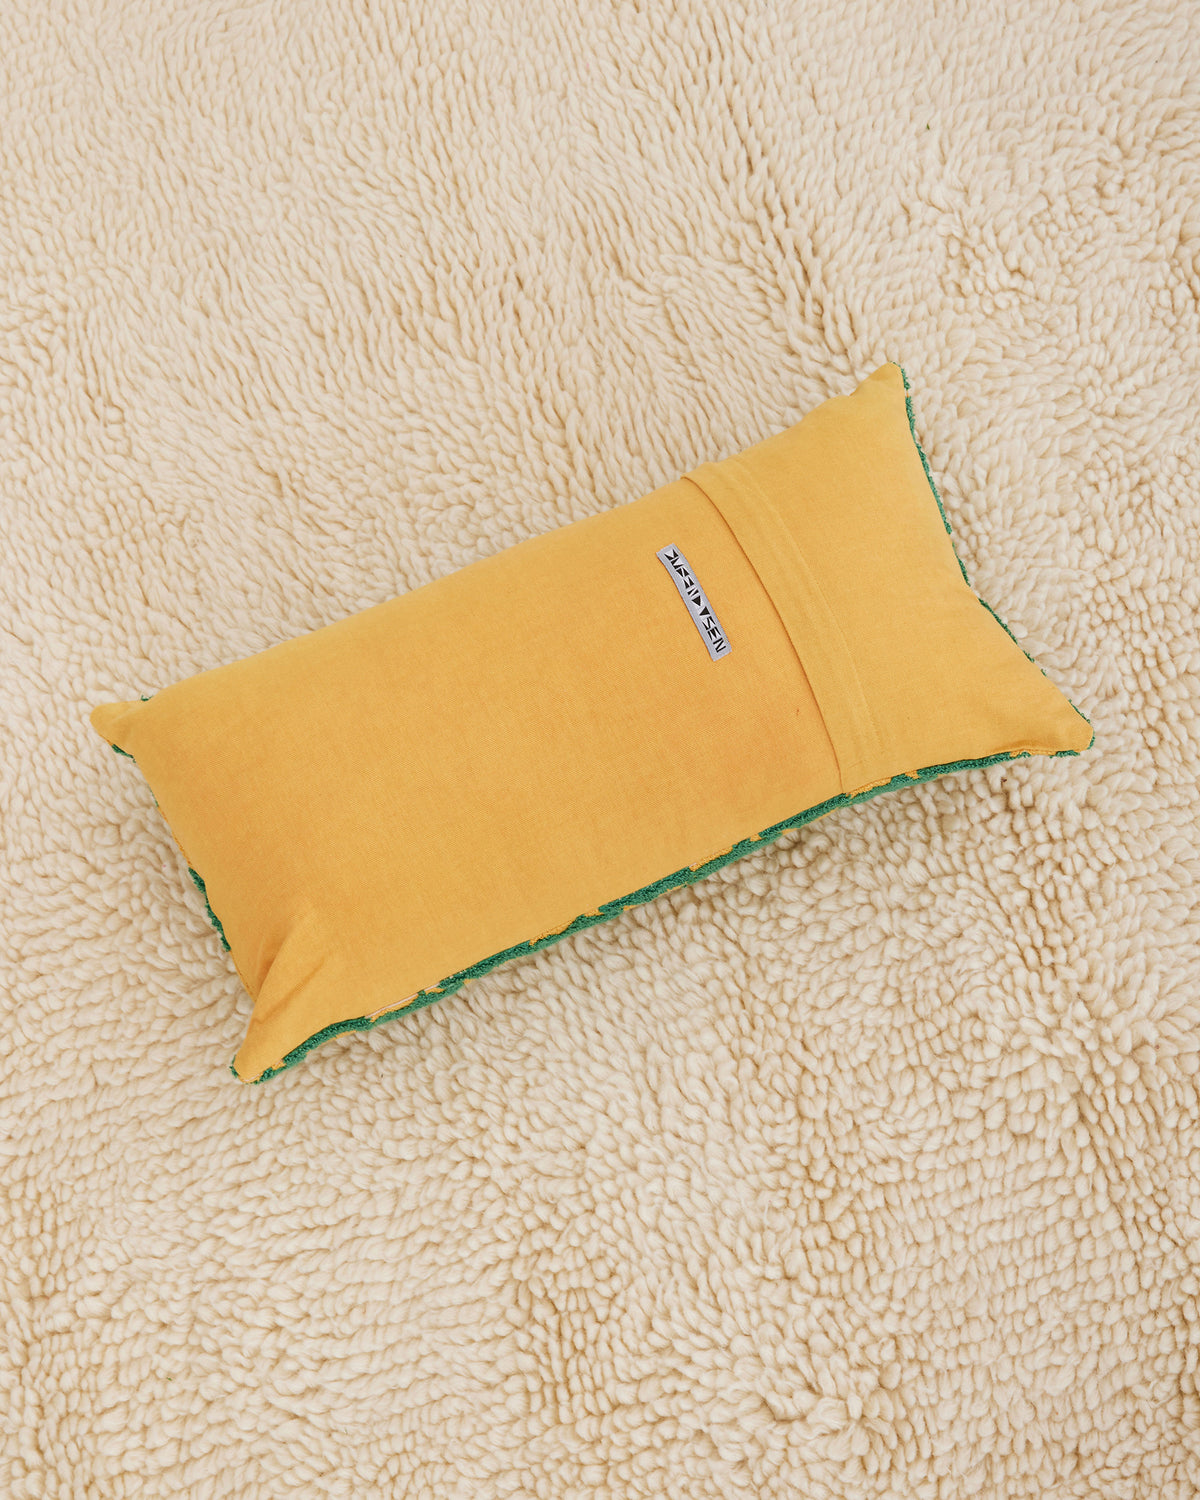 100% cotton embroidery and tufting bolster pillow in green and mustard Sun pattern. Non-embroidered natural canvas back with a zipper opening. Available as 12" x 22". Spot clean only. Made in India.